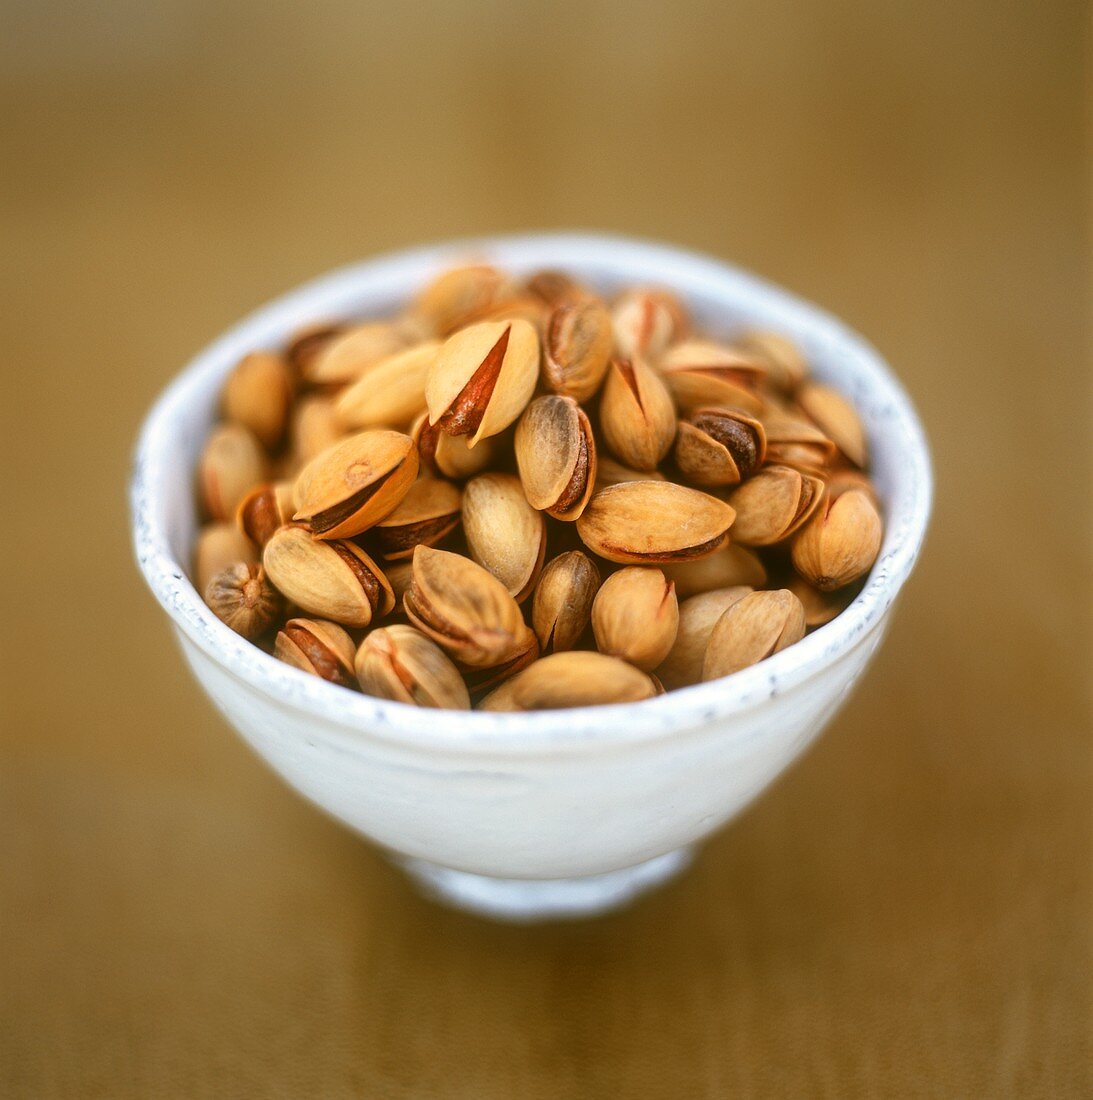 Roasted, salted pistachios in a bowl